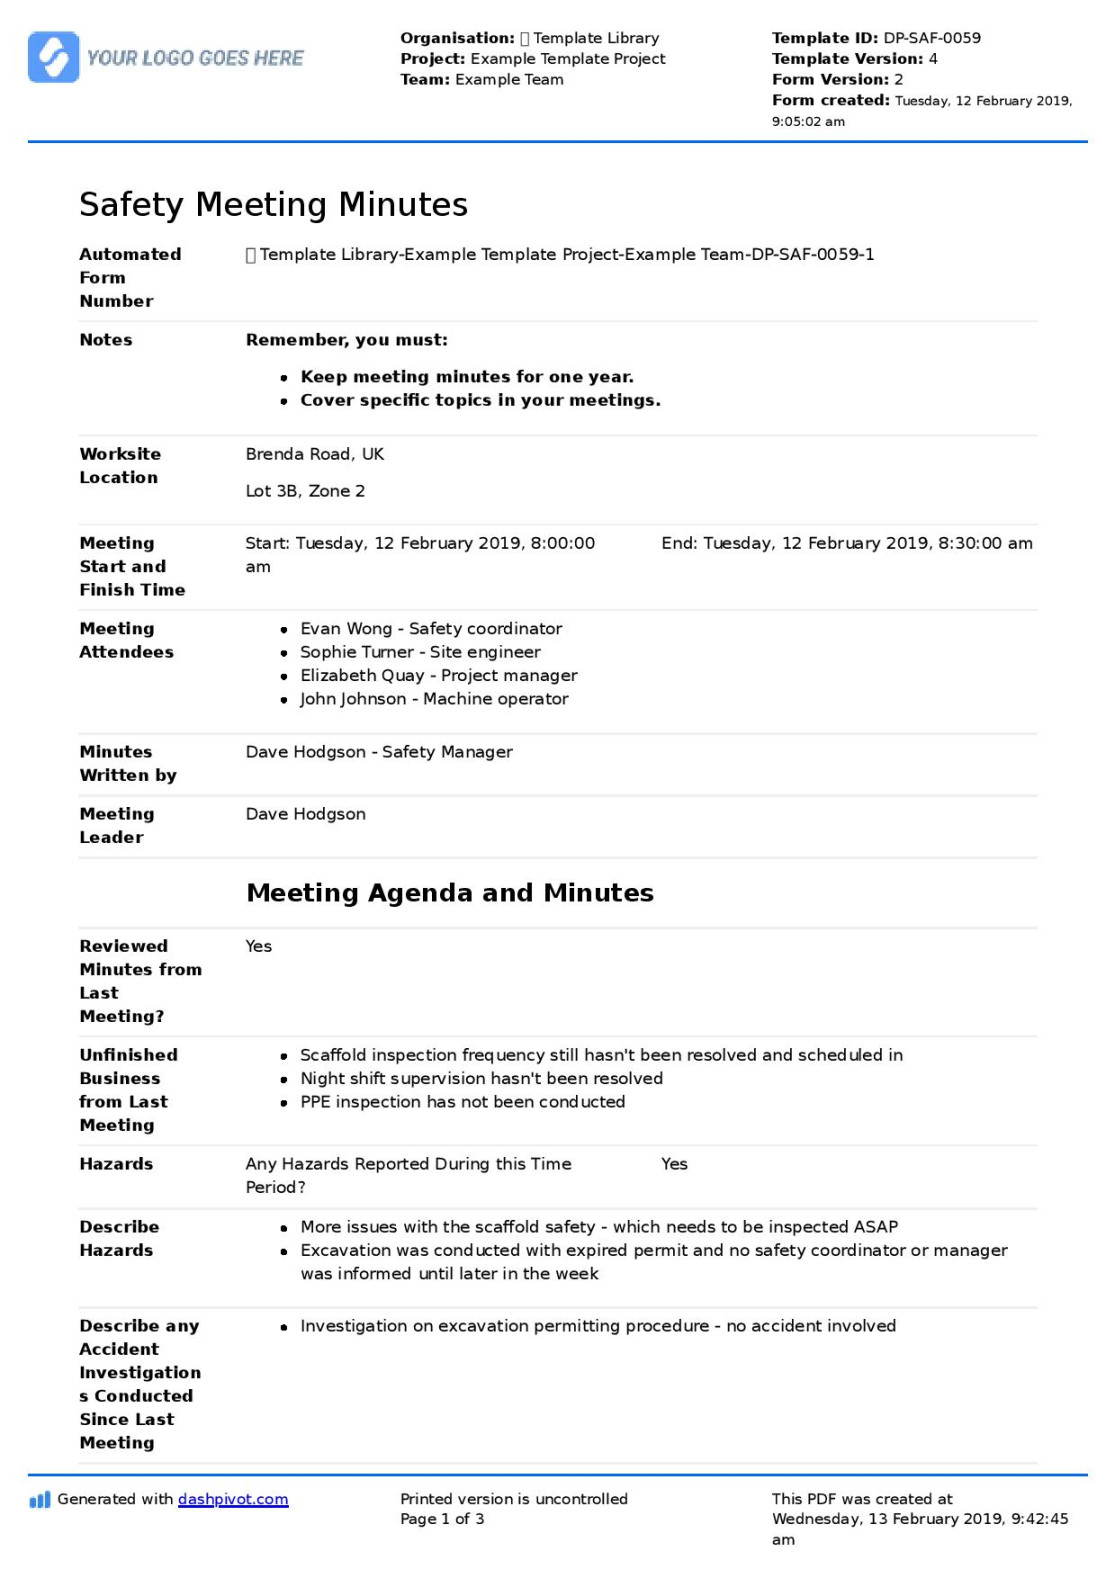 Safety Committee Meeting Agenda and Minutes Template